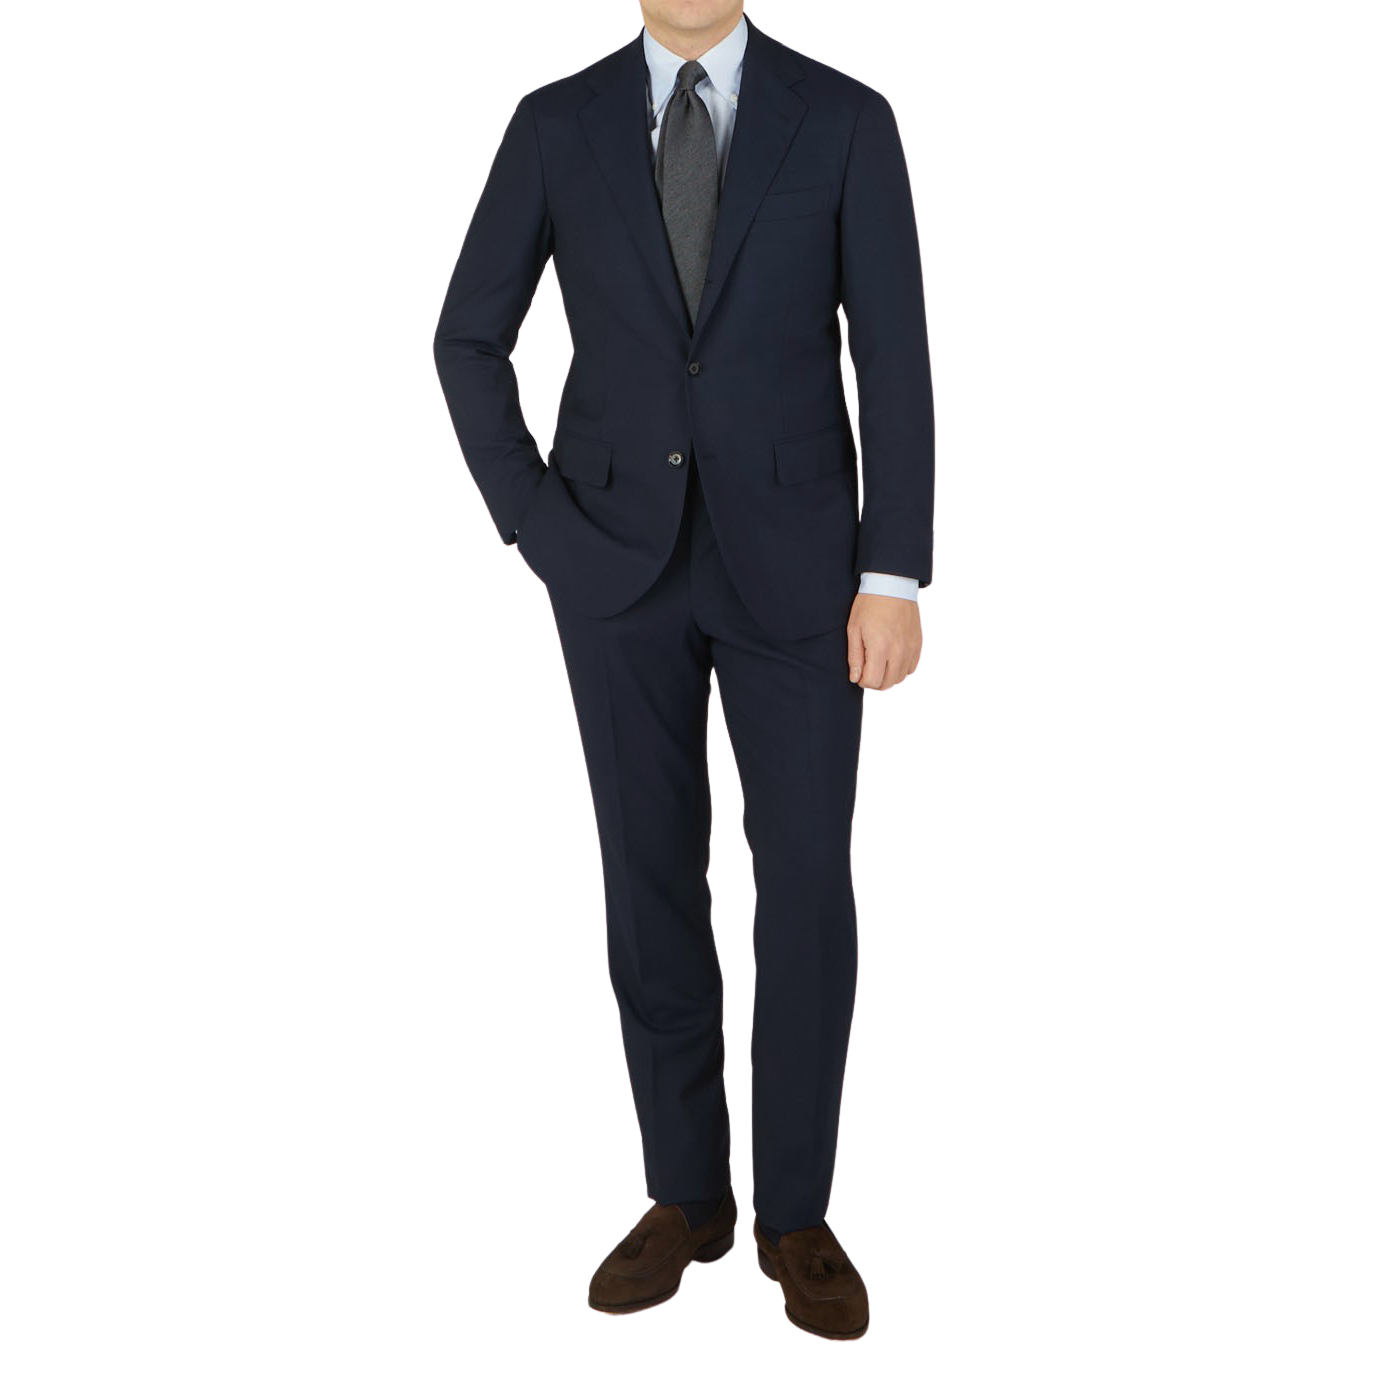 A man wearing a Ring Jacket Navy High Twist Wool Suit and tie made from fresco fabric.